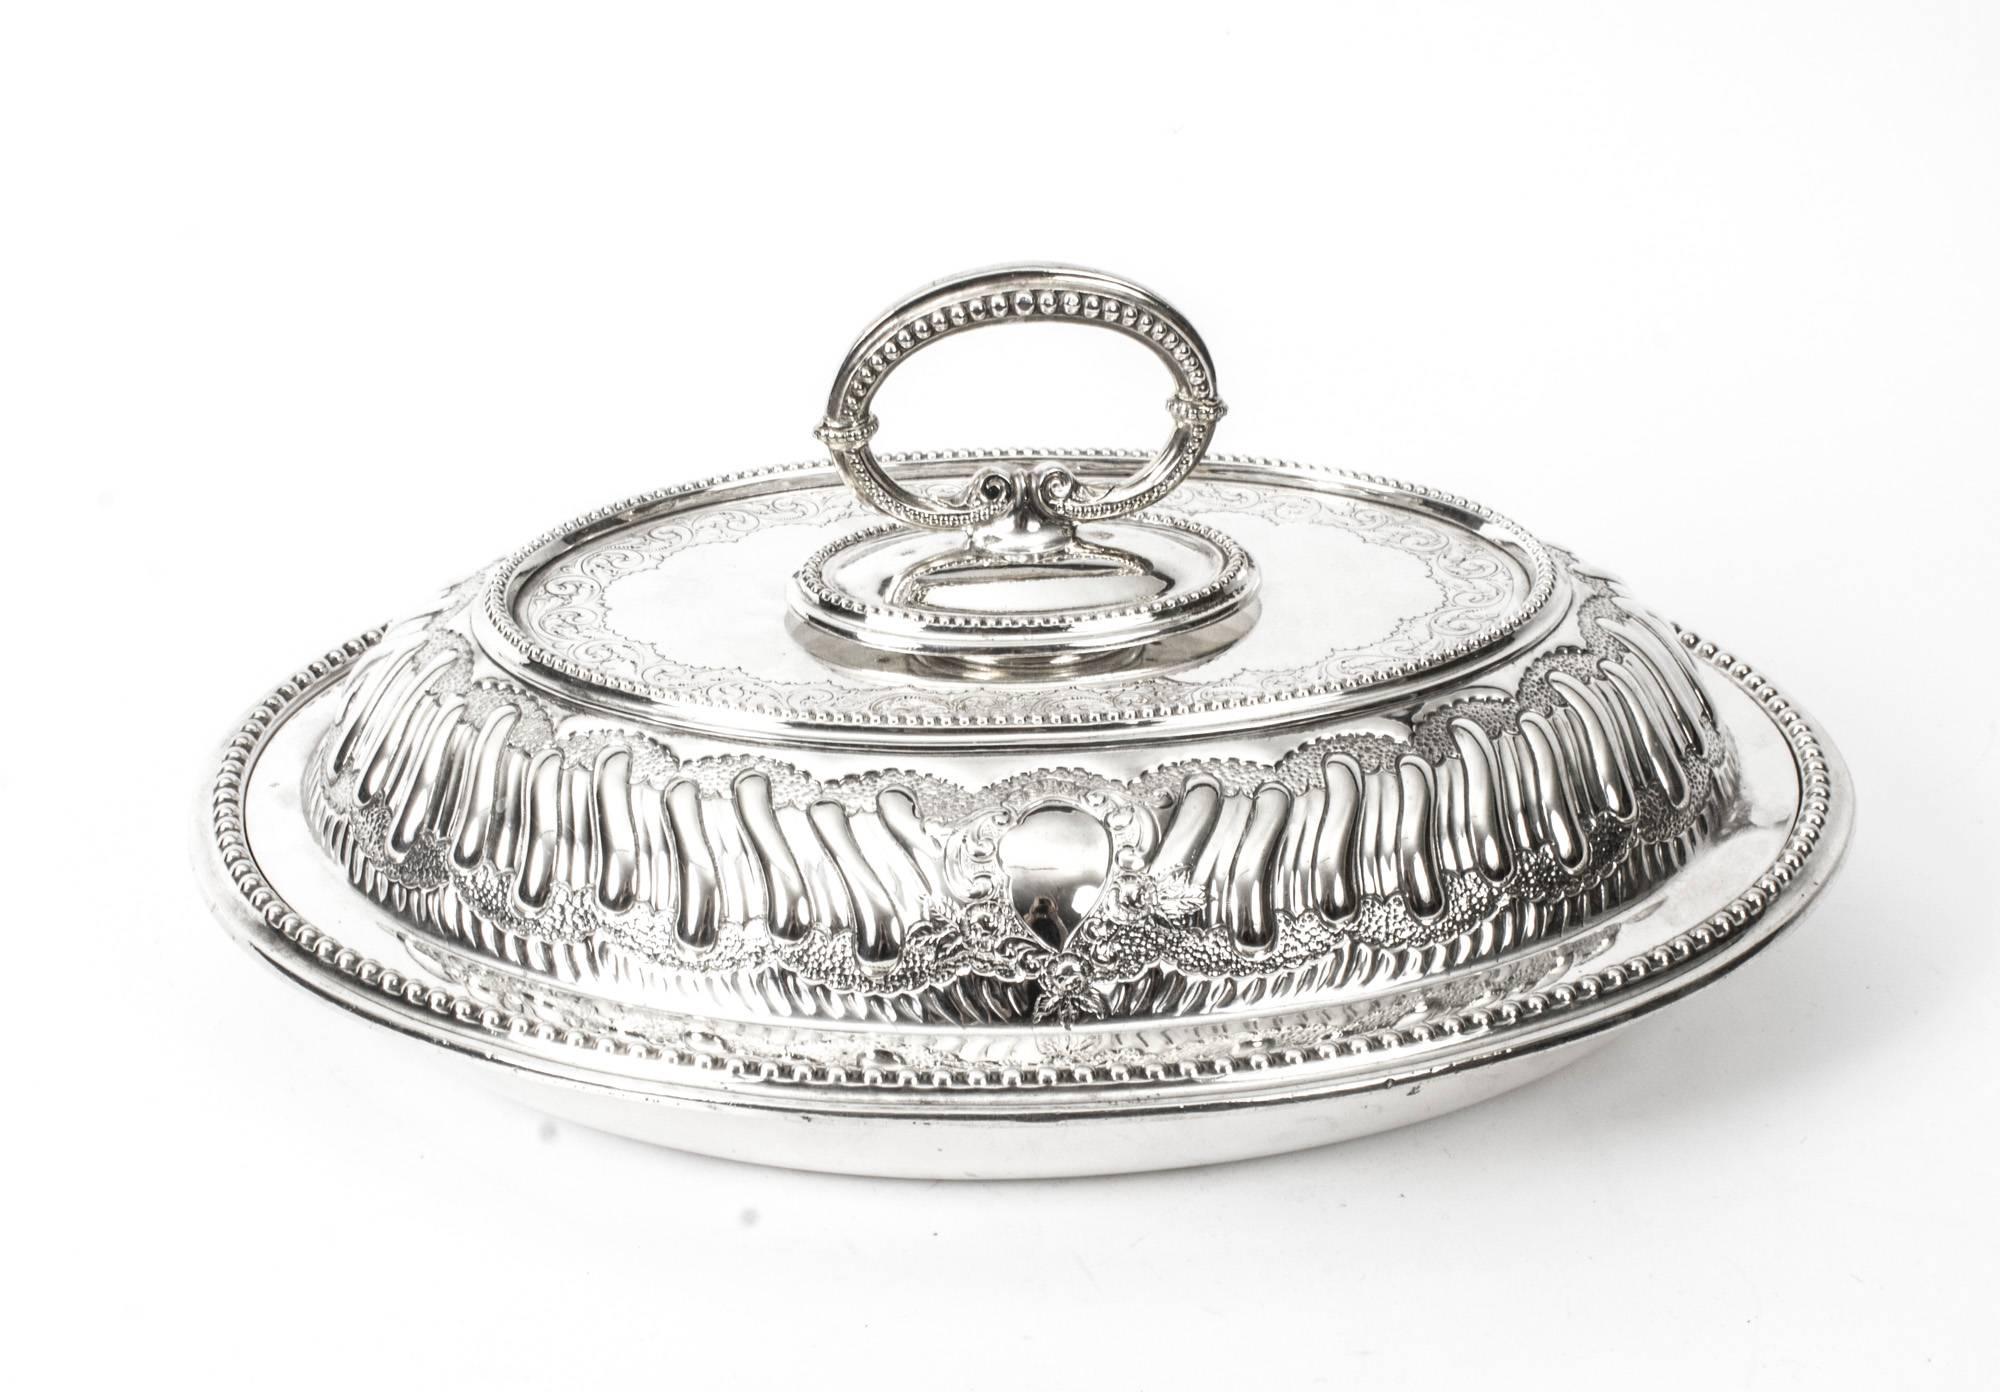 This is an exquisite and rare antique pair of English silver plated entree dishes, circa 1850 in date, and bearing the makers mark of the world renowned silversmiths "Mappin Brothers, 66 Cheapside, 220 Regent Street, London &